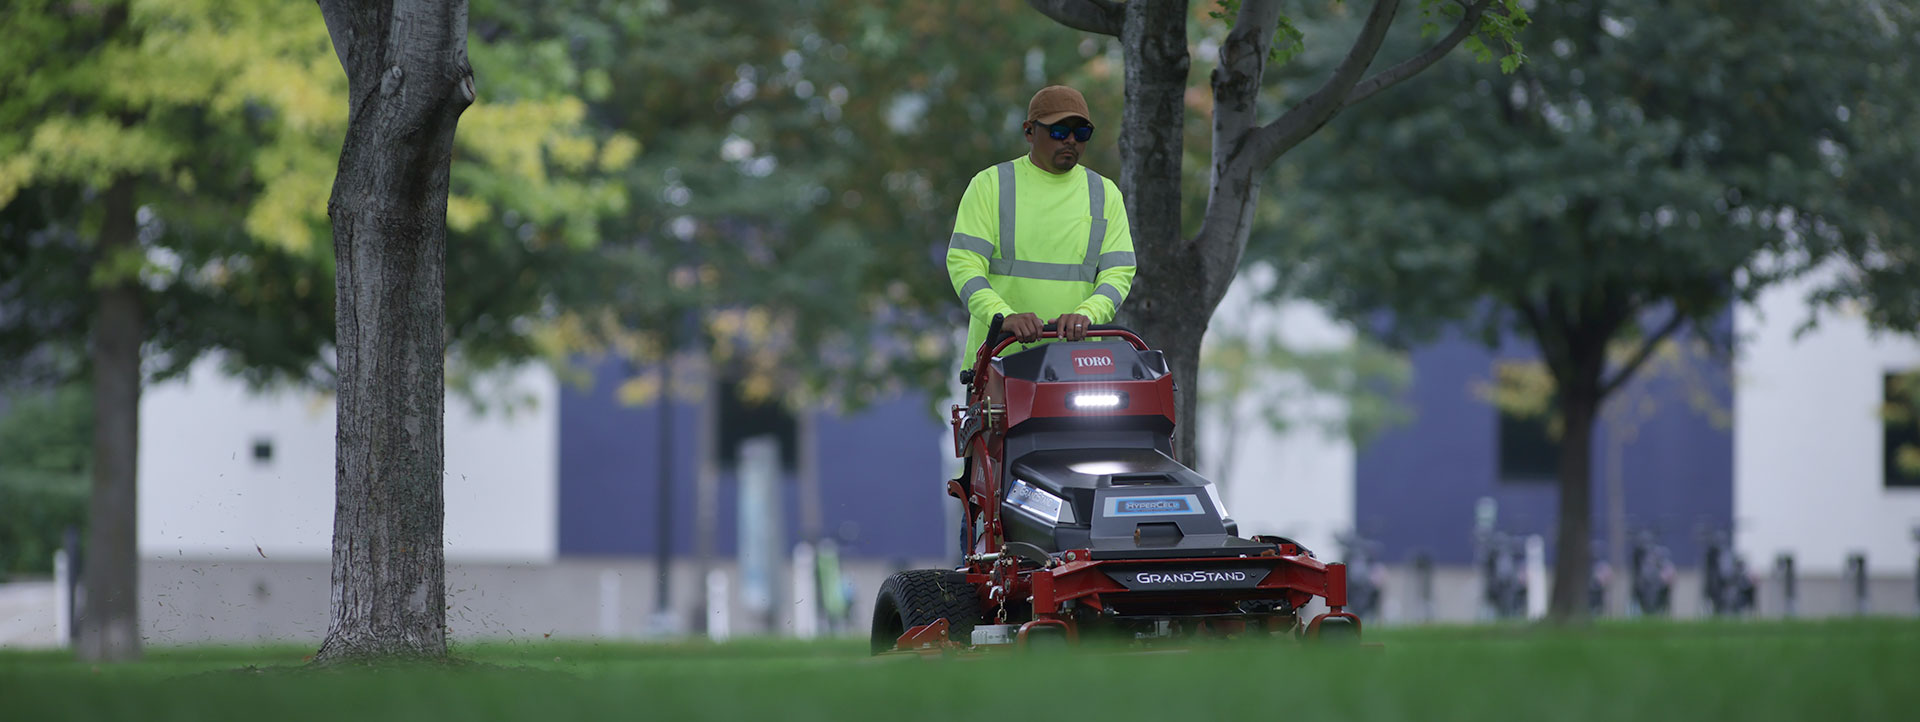 Toro's vast portfolio of innovative, new technologies and all-electric mowing equipment that increases productivity, lowers maintenance costs and gain efficiencies.